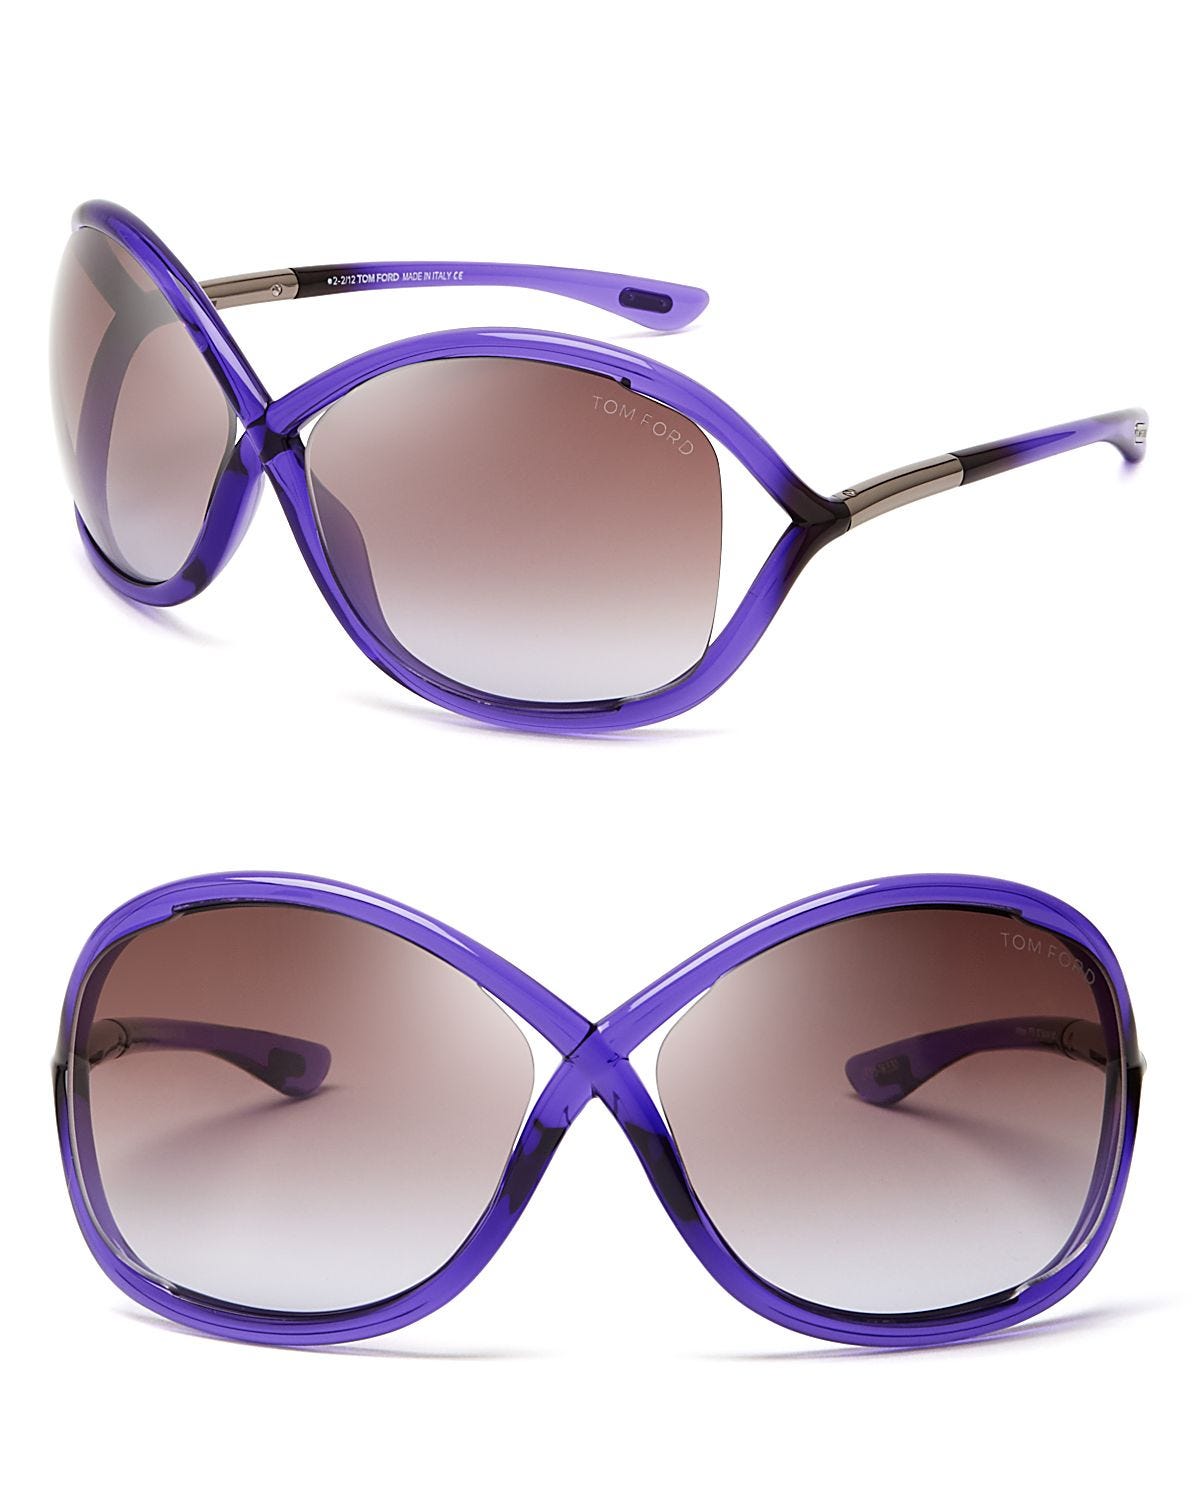 These Purple Tom Ford Sunglasses Have Changed Me | by Adeline Dimond |  Sybarite | Medium